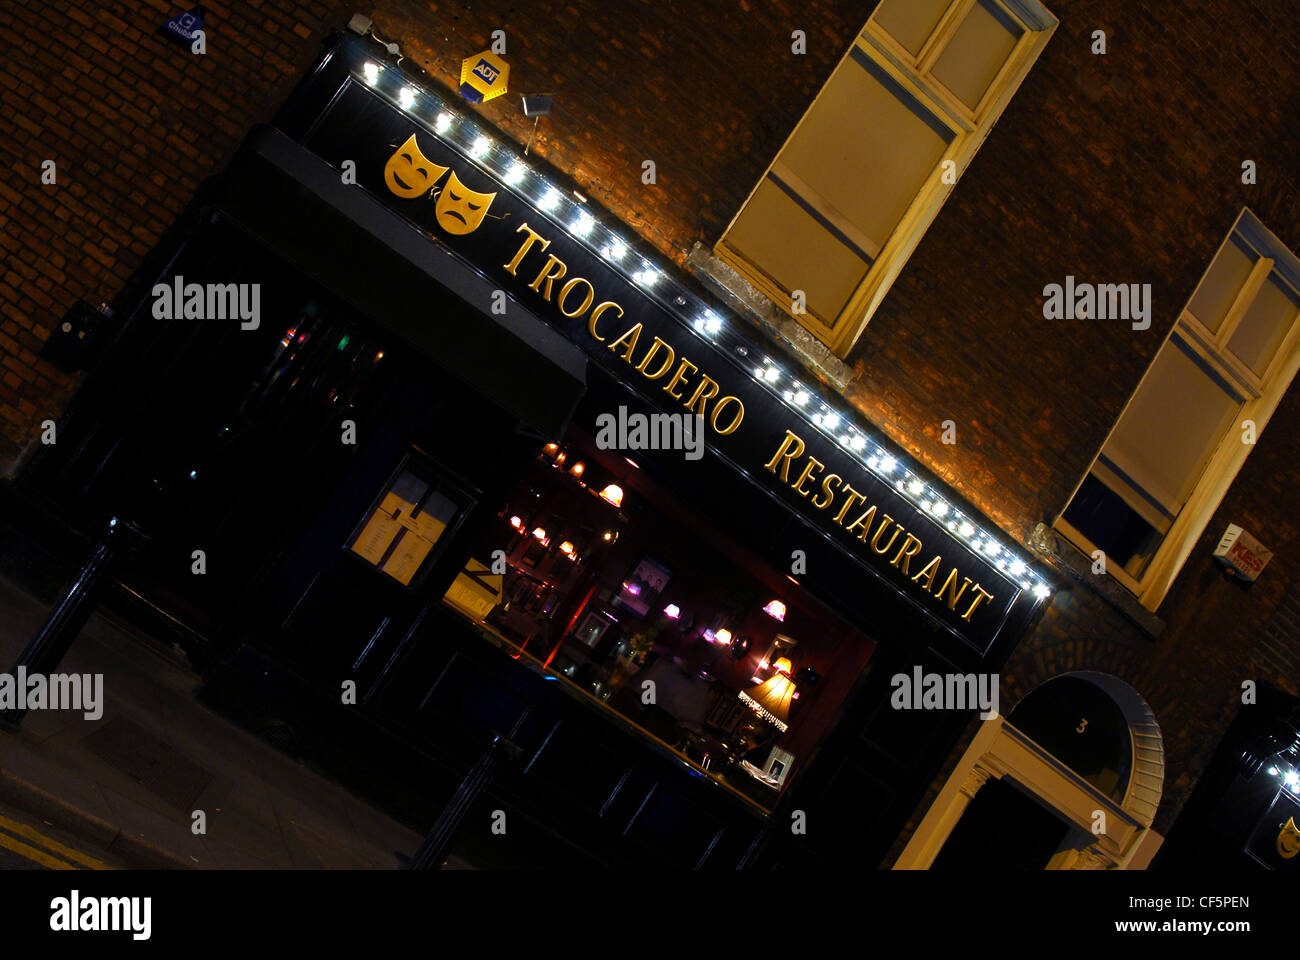 A night time view of the Trocadero Restaurant in Dublin. Stock Photo